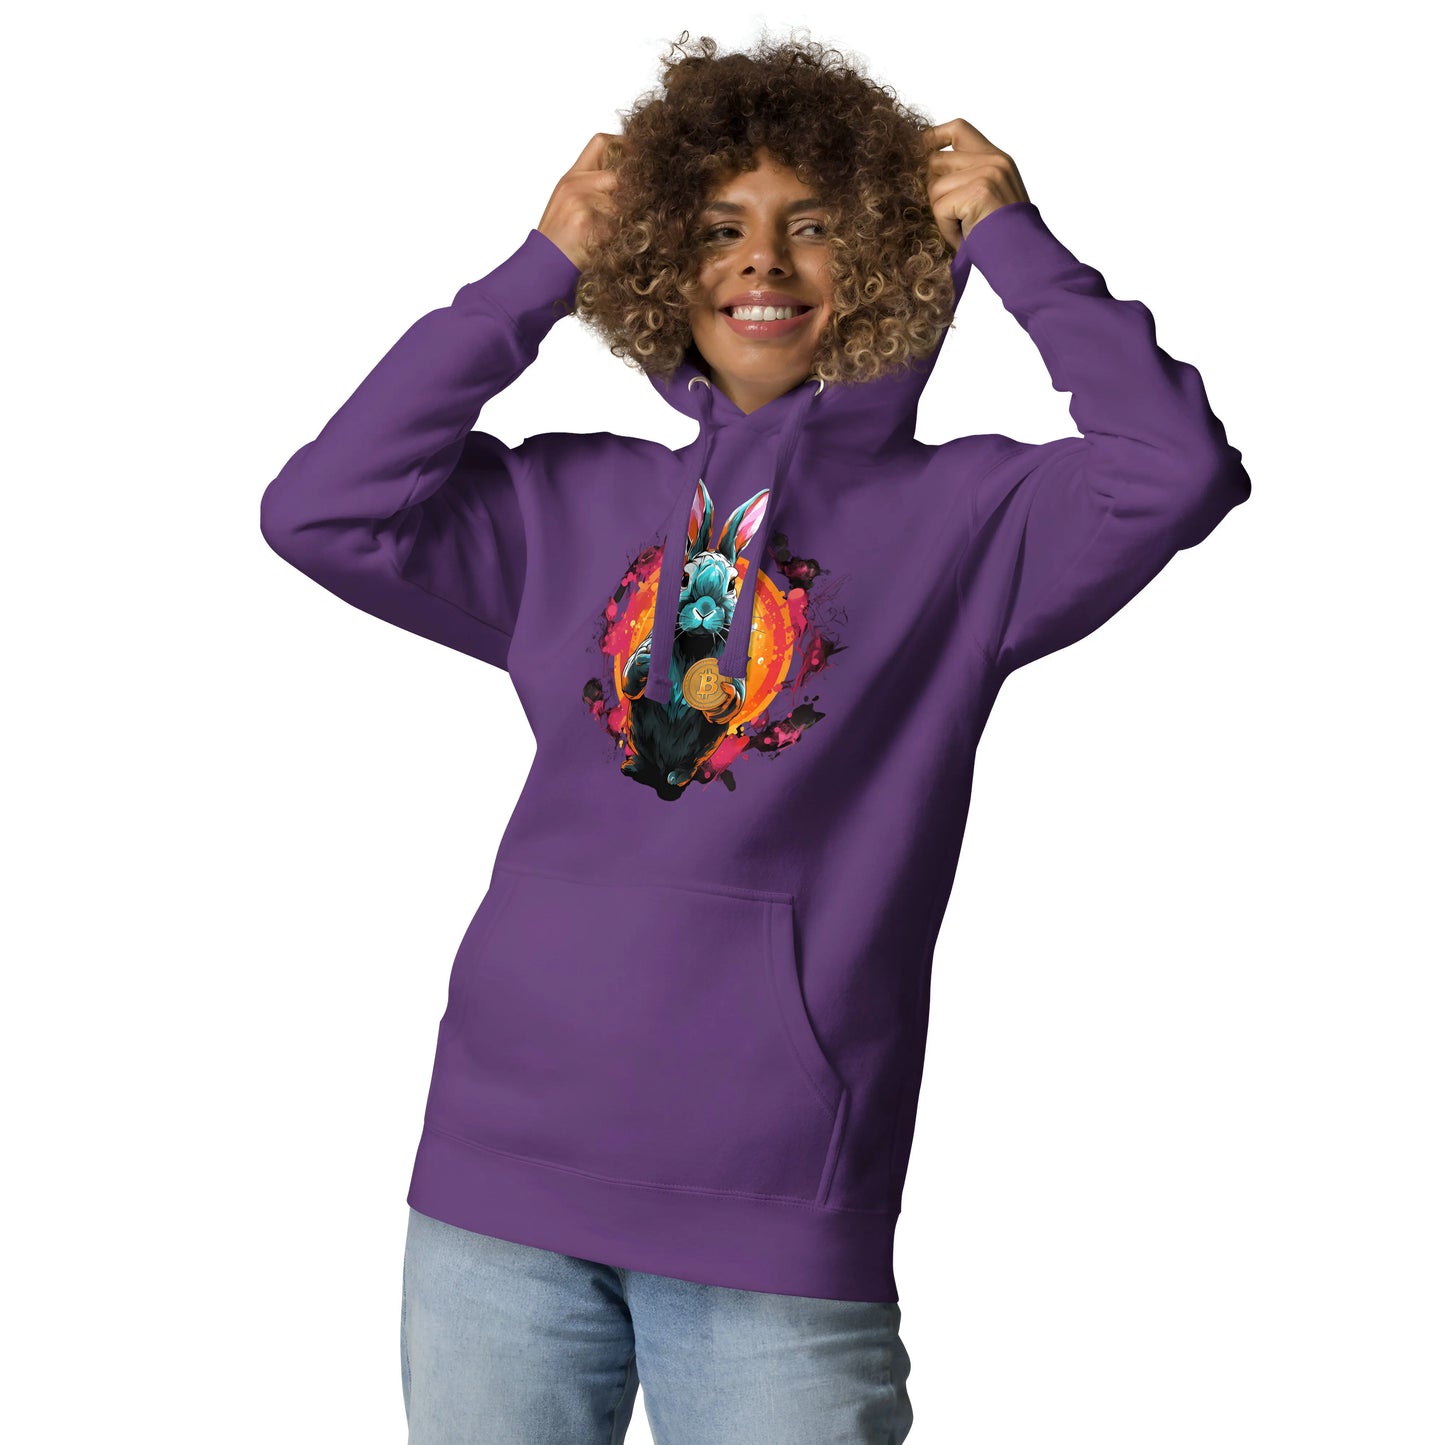 Falling Down The Bitcoin Rabbit Hole - Premium Unisex Bitcoin Hoodie - Join us Too! Purple Color